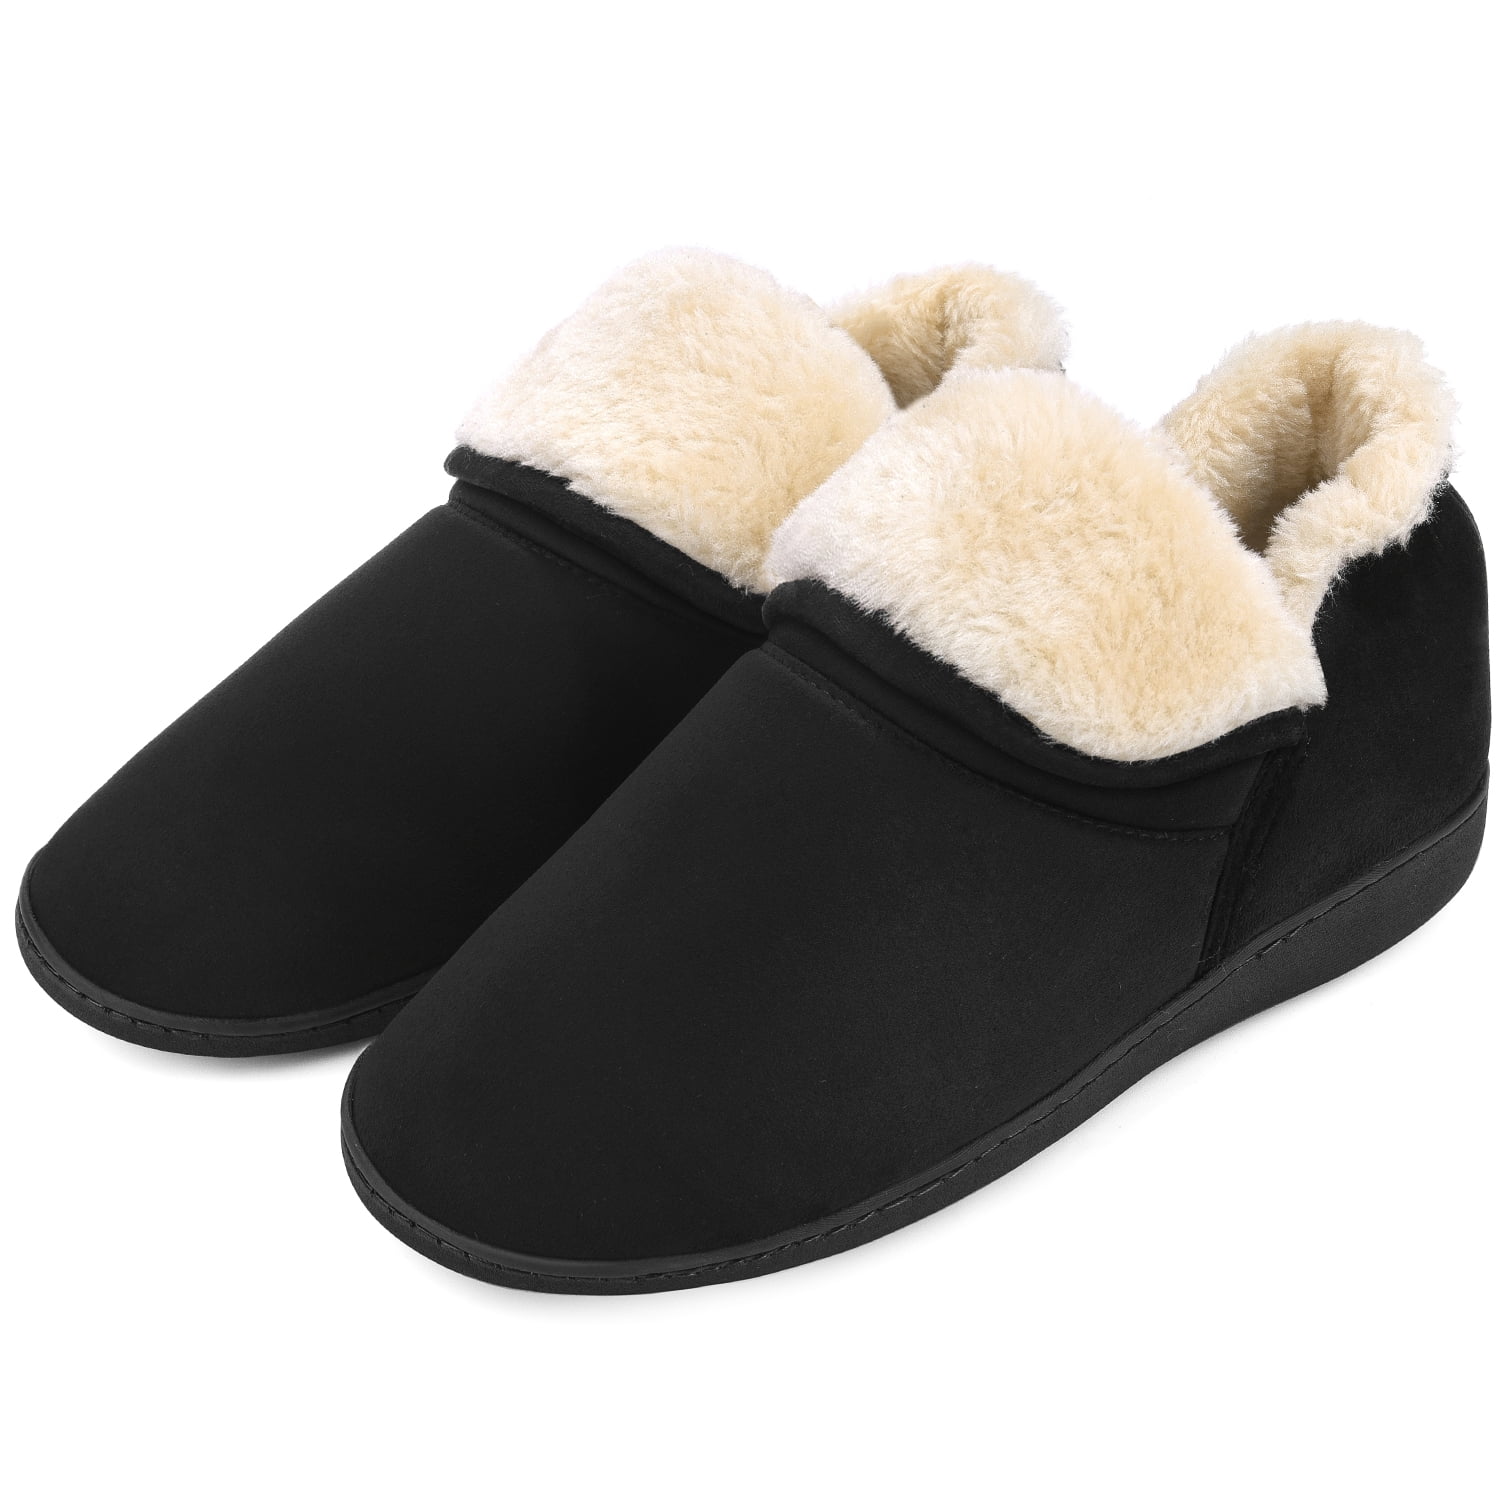 Mens Soft Furry Indoor Outdoor Moccasin Winter Slippers Mules Shoes Size 7-12